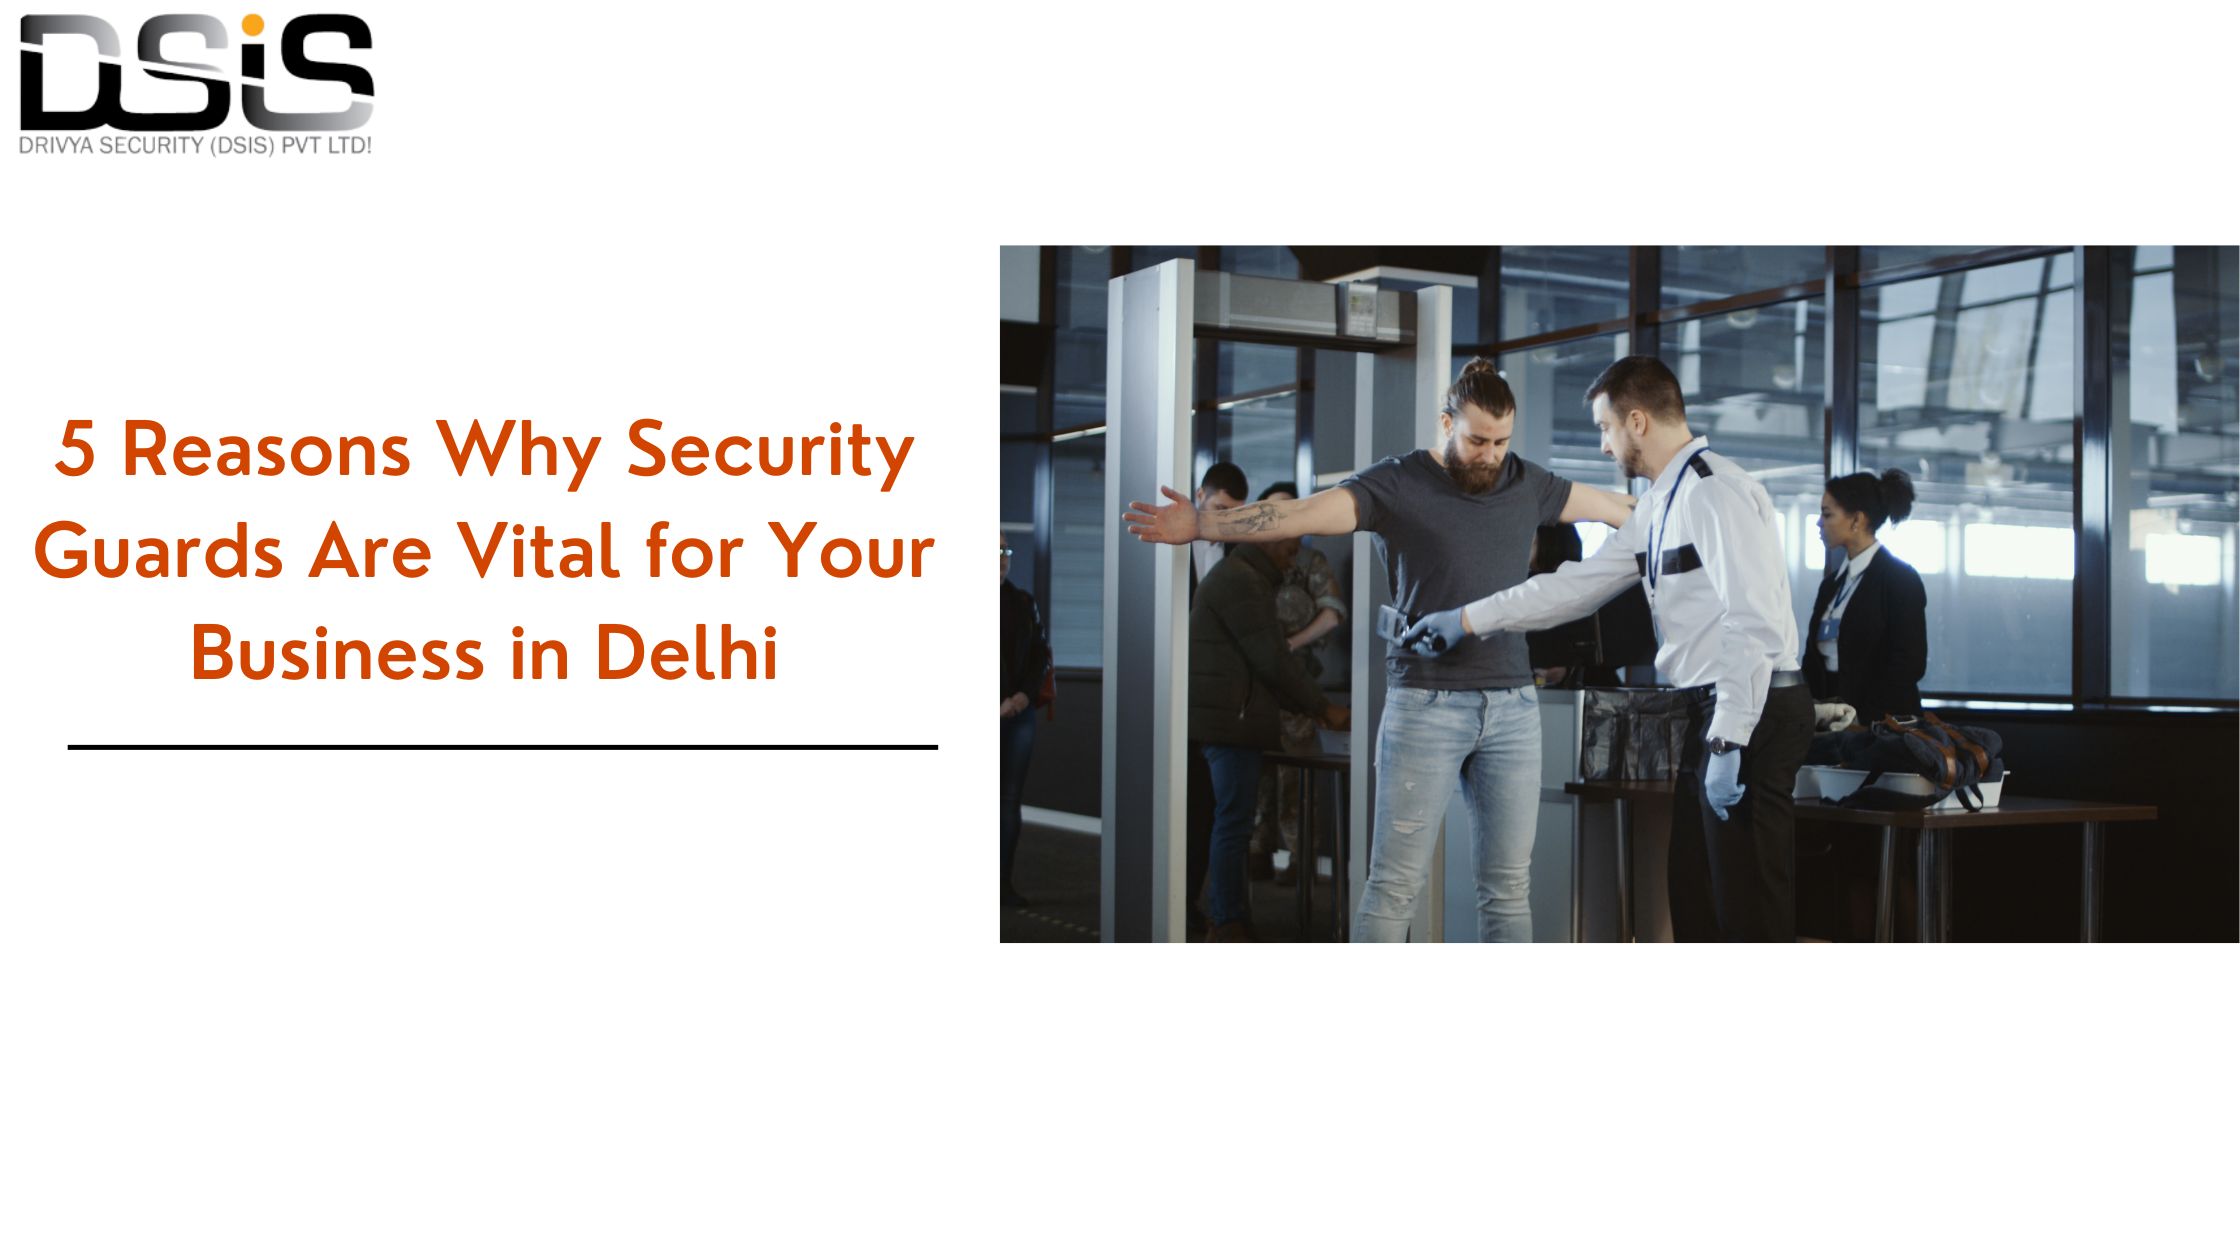 5 Reasons Why Security Guards Are Vital for Your Business in Delhi